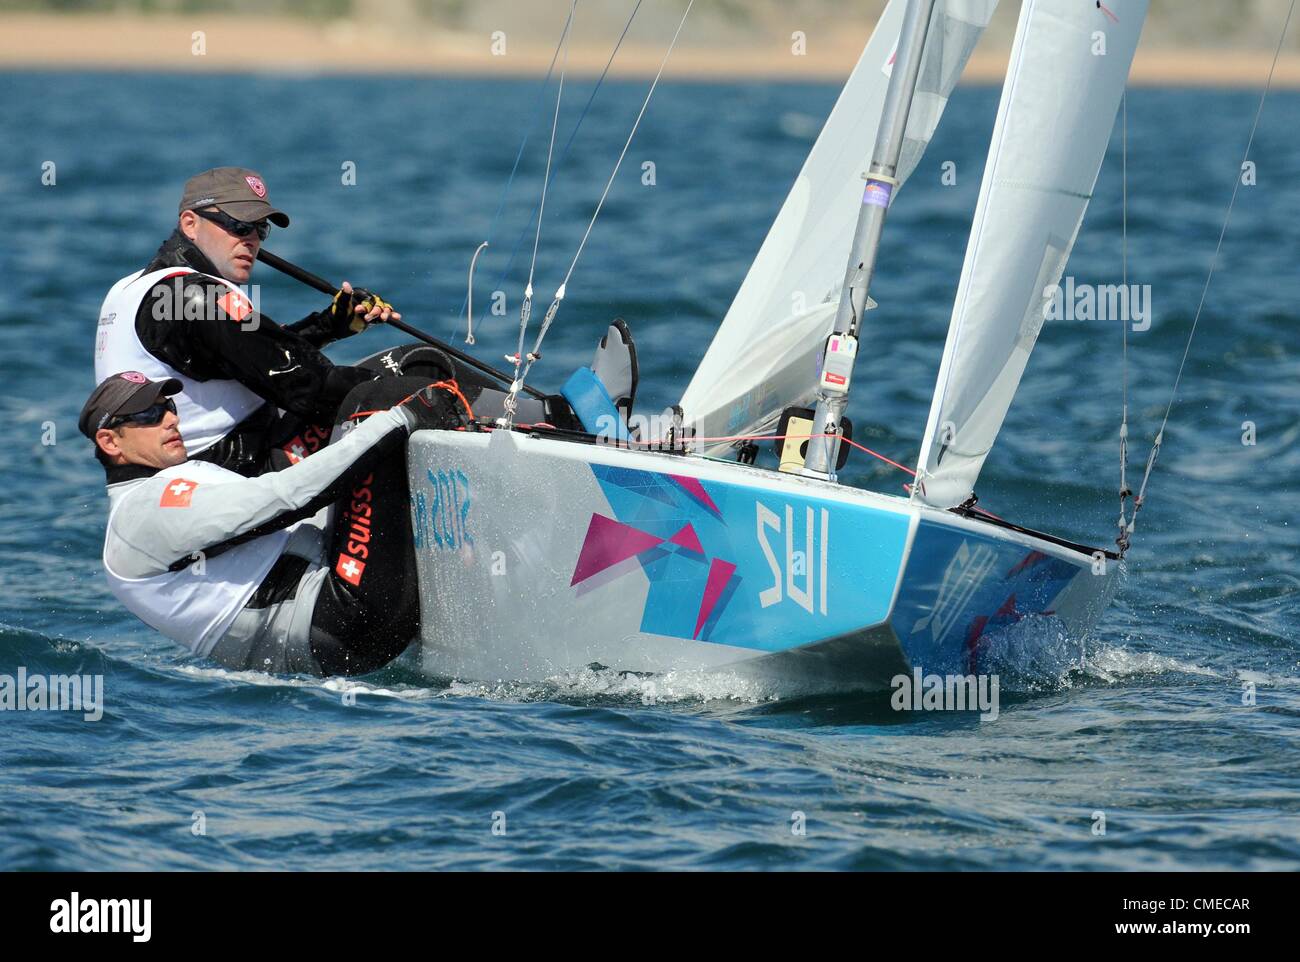 Olympic Sailing, action during the London 2012 Olympic Games at the Weymouth & Portland Venue, Dorset, Britain, UK.  Swiss sailors Flavio Marazzi and Enrico de Maria in the Star sailing class , July 29, 2012 PICTURE: DORSET MEDIA SERVICE Stock Photo